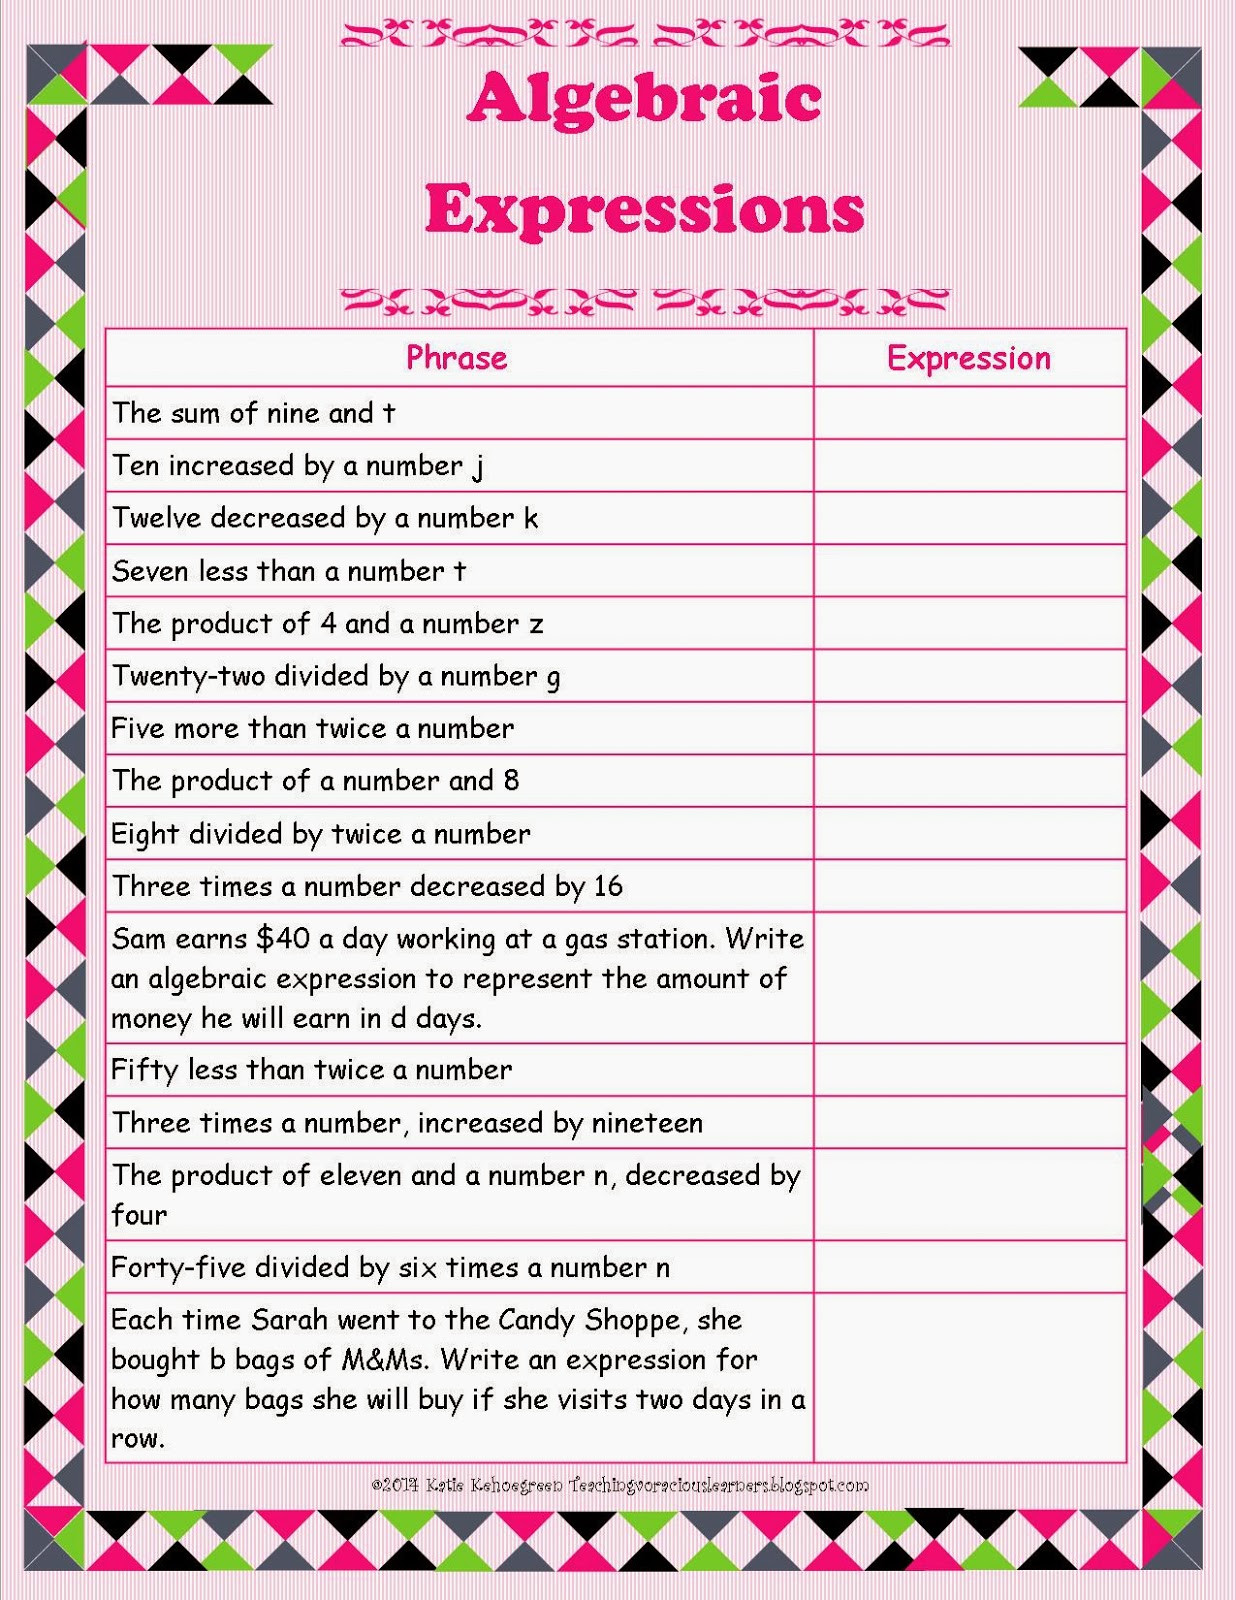 Writing and Evaluating Expressions Worksheet Write and Evaluate Expressions for 4th Grade